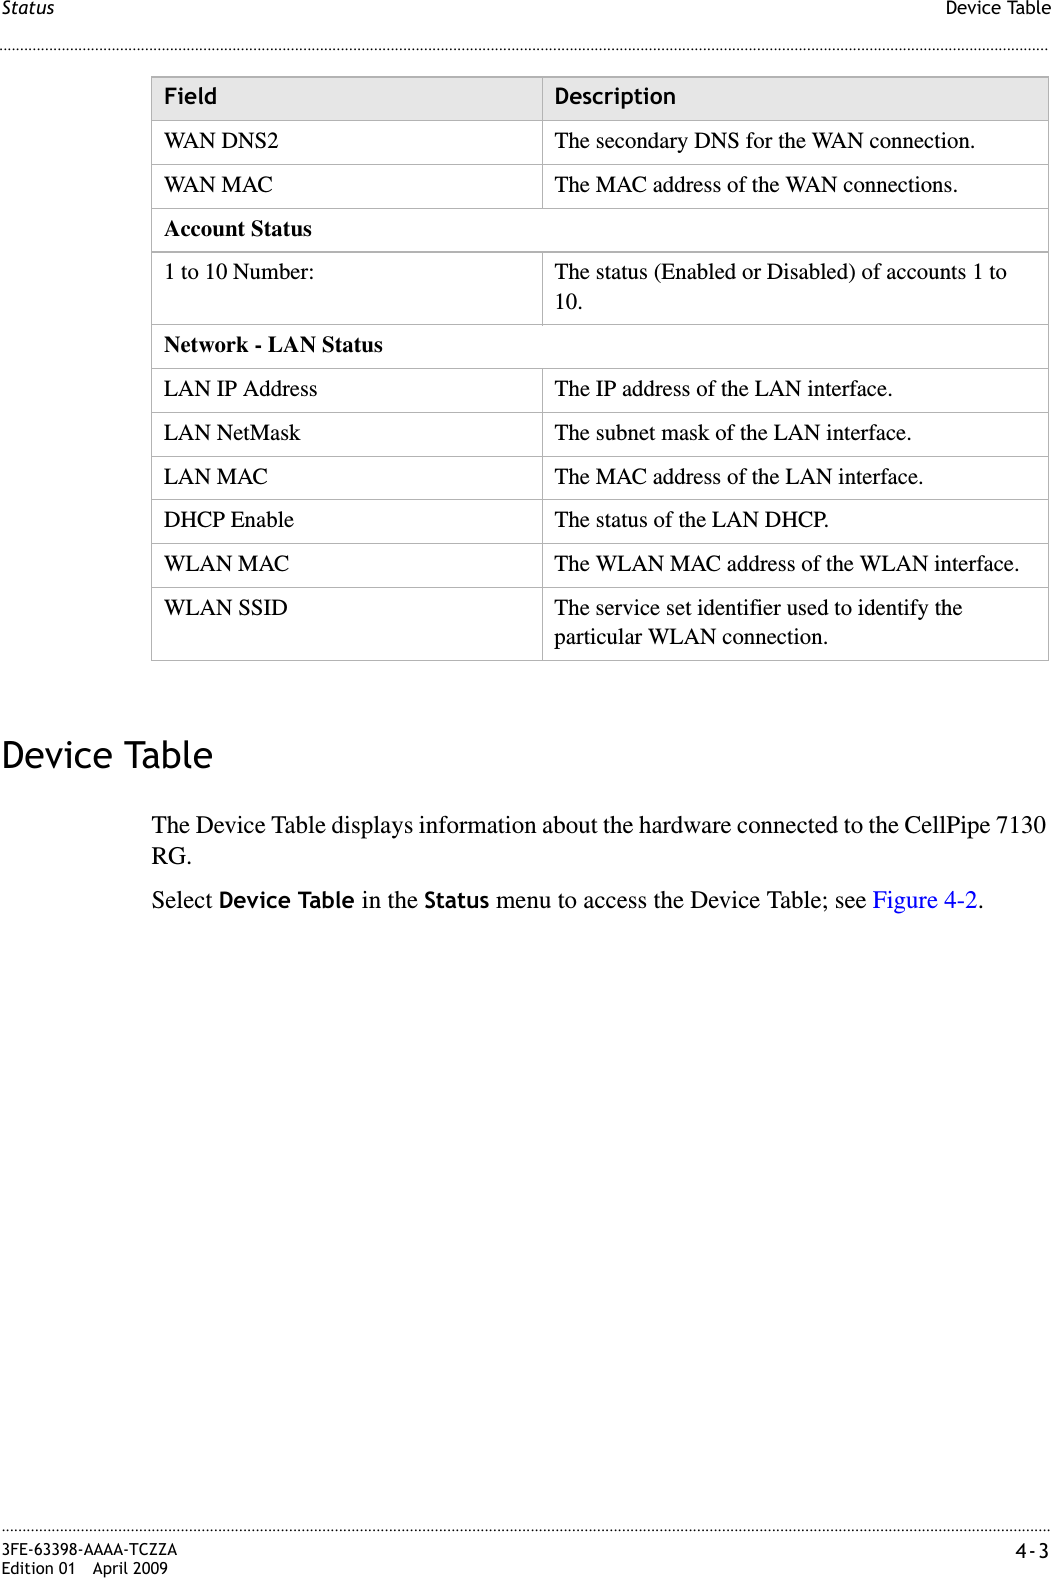 Device TableStatus............................................................................................................................................................................................................................................................3FE-63398-AAAA-TCZZAEdition 01 April 2009 4-3............................................................................................................................................................................................................................................................Device TableThe Device Table displays information about the hardware connected to the CellPipe 7130 RG.Select Device Table in the Status menu to access the Device Table; see Figure 4-2.WAN DNS2 The secondary DNS for the WAN connection.WAN MAC The MAC address of the WAN connections.Account Status1 to 10 Number: The status (Enabled or Disabled) of accounts 1 to 10.Network - LAN StatusLAN IP Address The IP address of the LAN interface.LAN NetMask The subnet mask of the LAN interface.LAN MAC The MAC address of the LAN interface.DHCP Enable The status of the LAN DHCP.WLAN MAC The WLAN MAC address of the WLAN interface.WLAN SSID The service set identifier used to identify the particular WLAN connection.Field Description